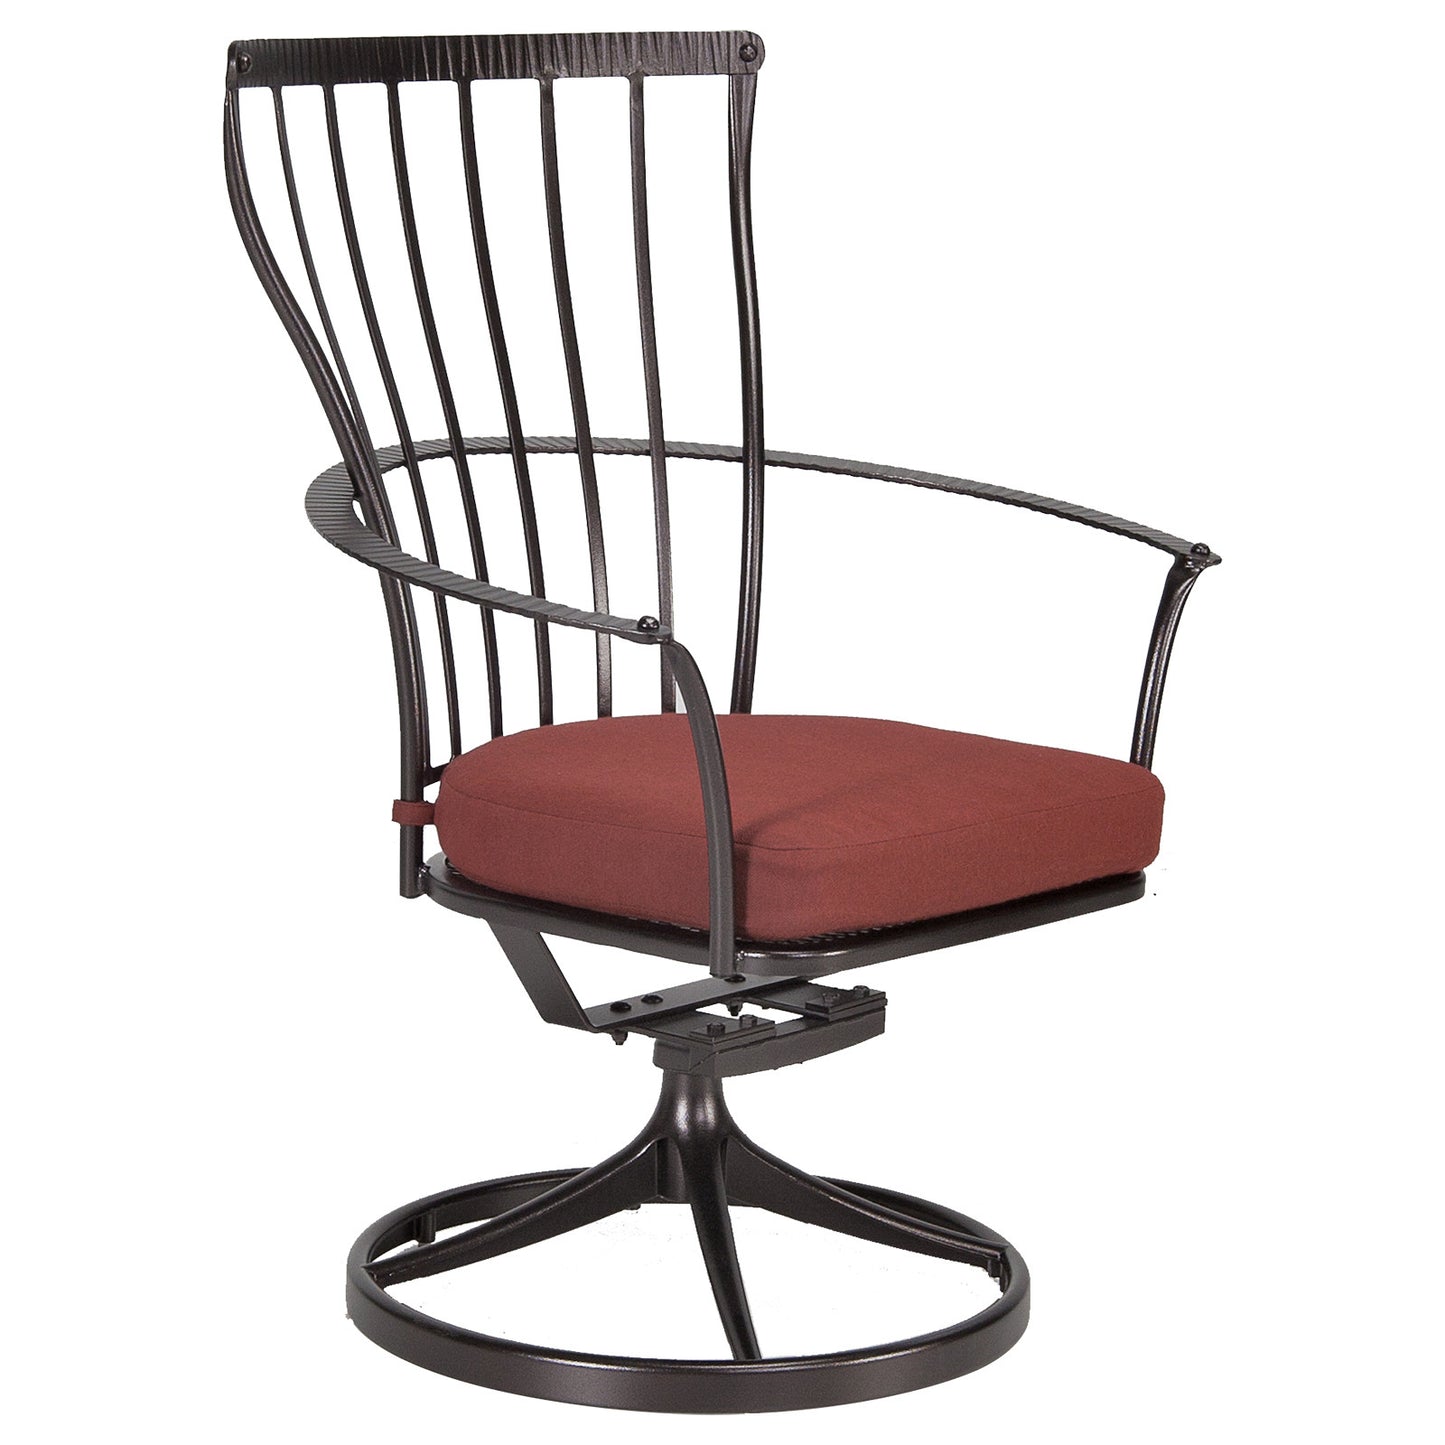 O.W. Lee Monterra Outdoor Patio Dining Swivel Rocker is available at Jacobs Custom Living.OW Lee Monterra Patio Dining Swivel Rocker | Jacobs Custom Living